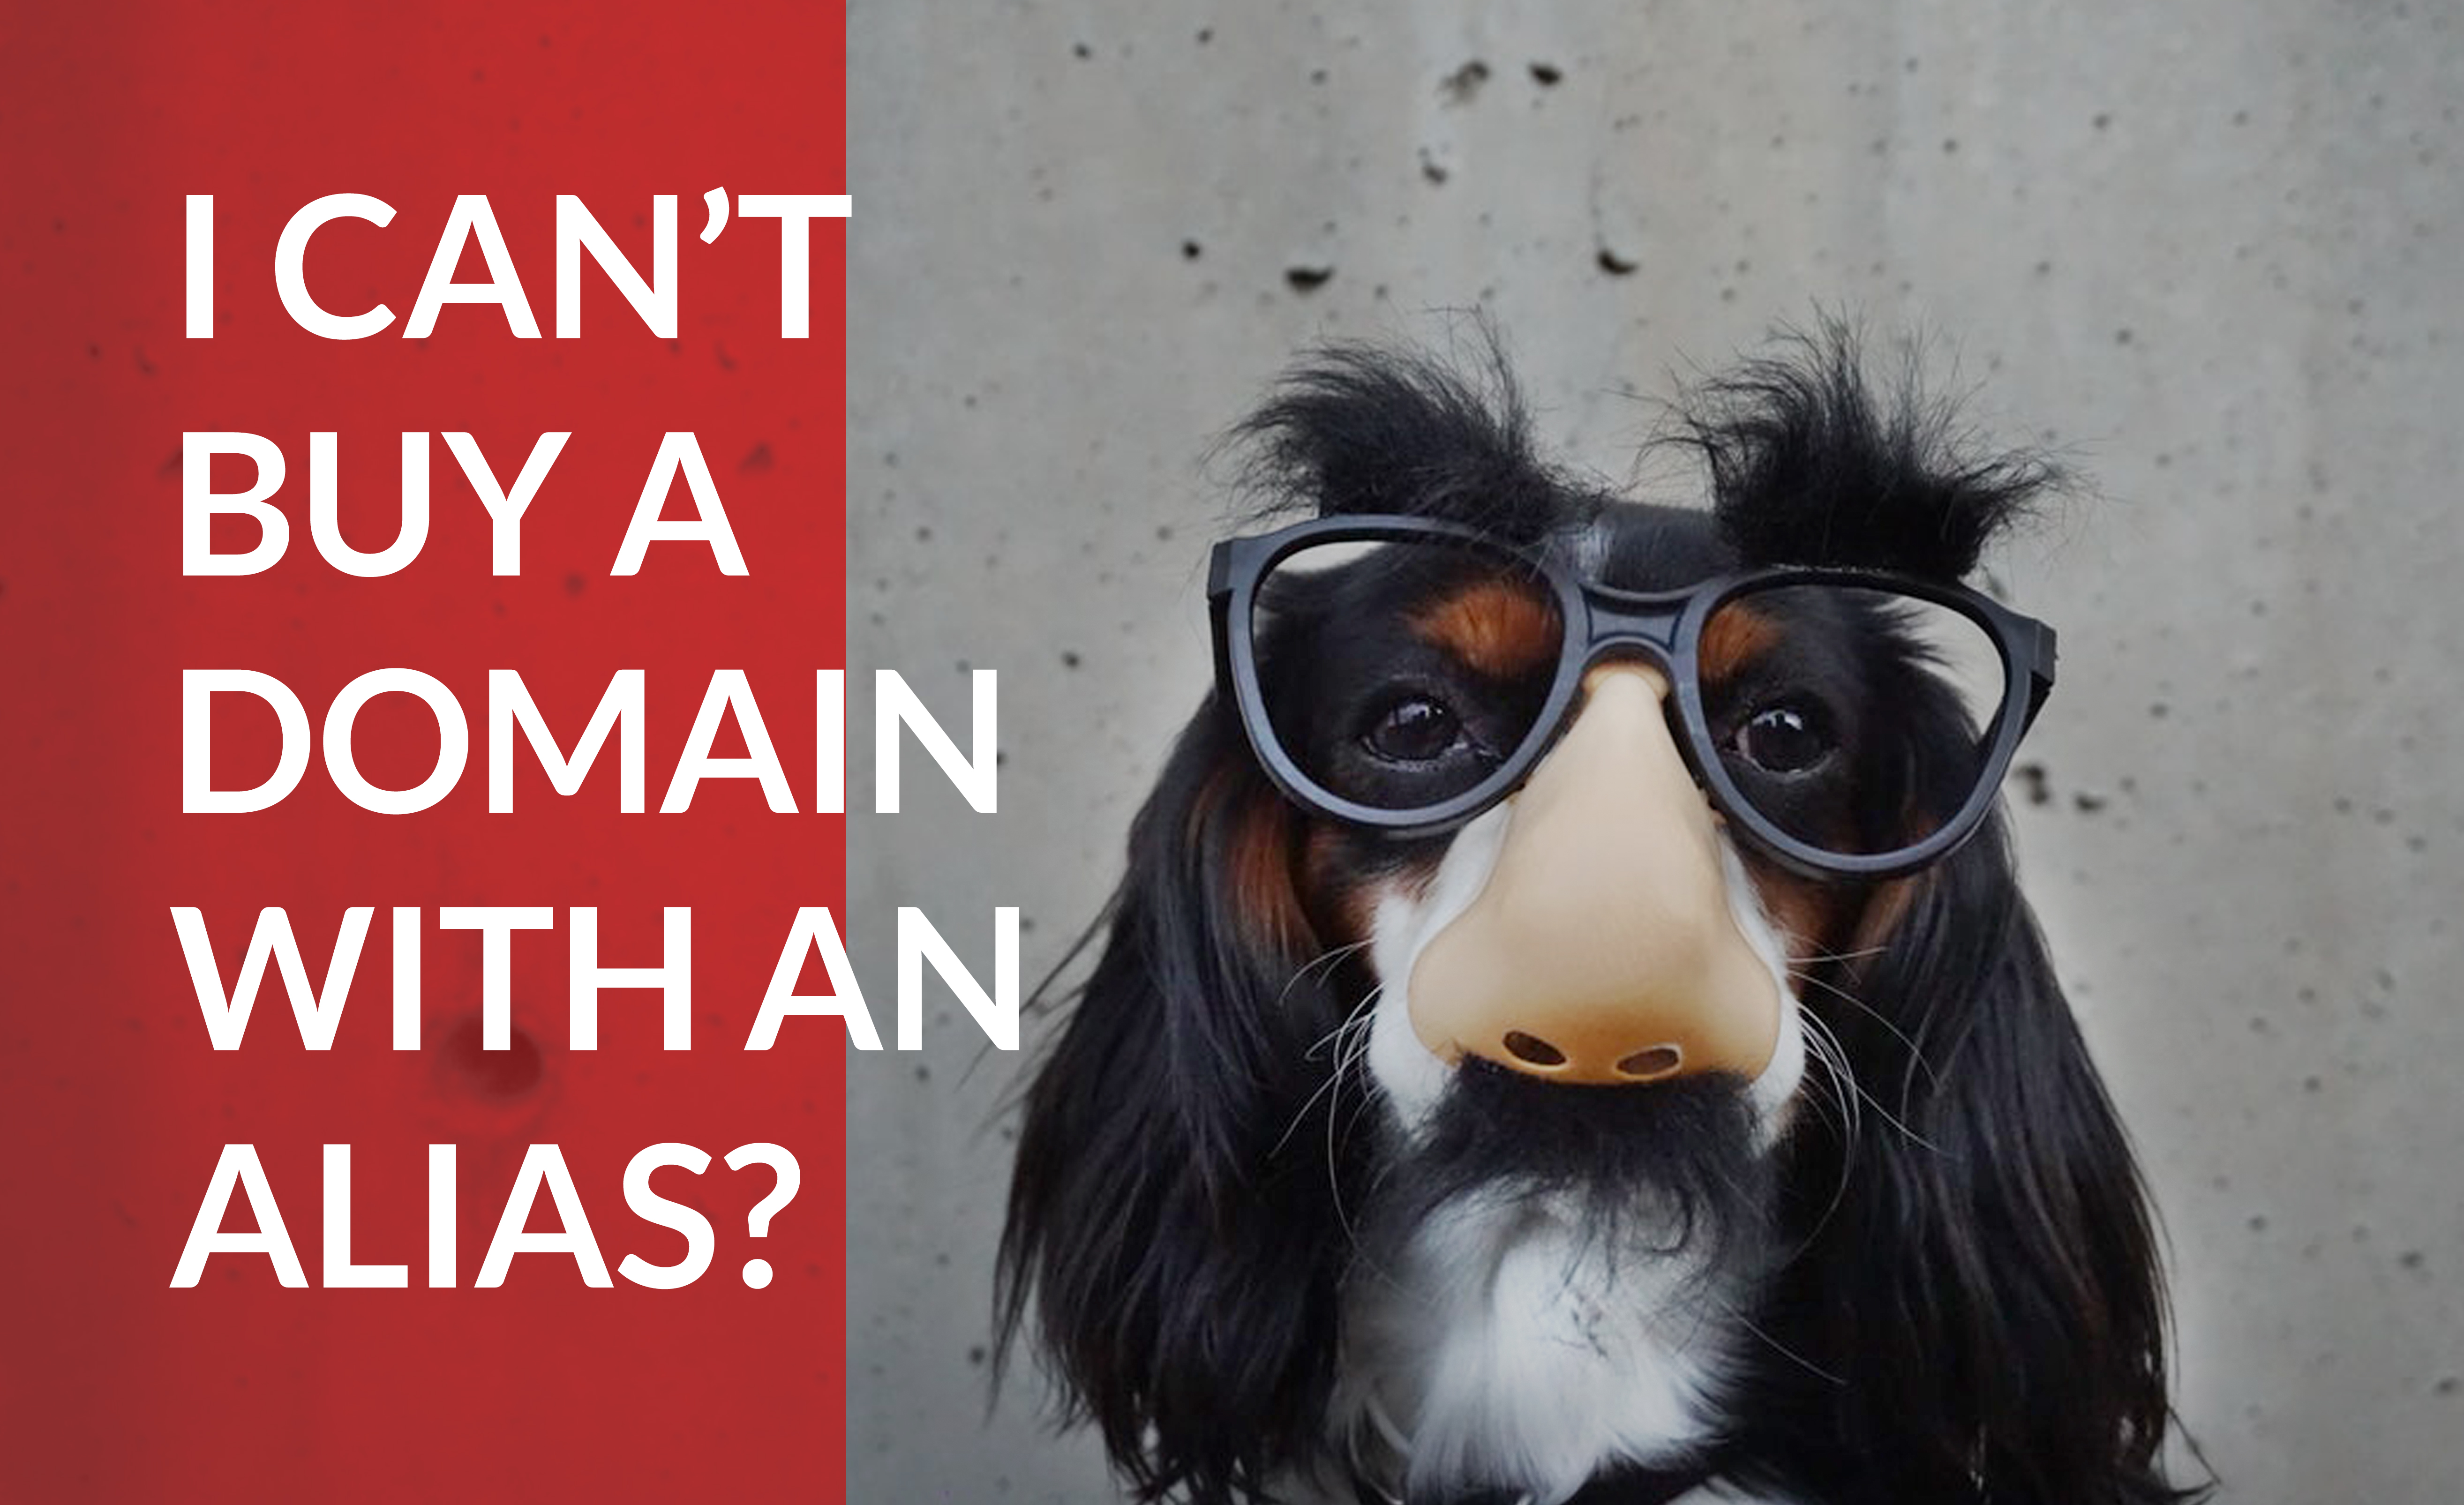 Find out why you have to buy a domain name with your legal name, and not an alias.